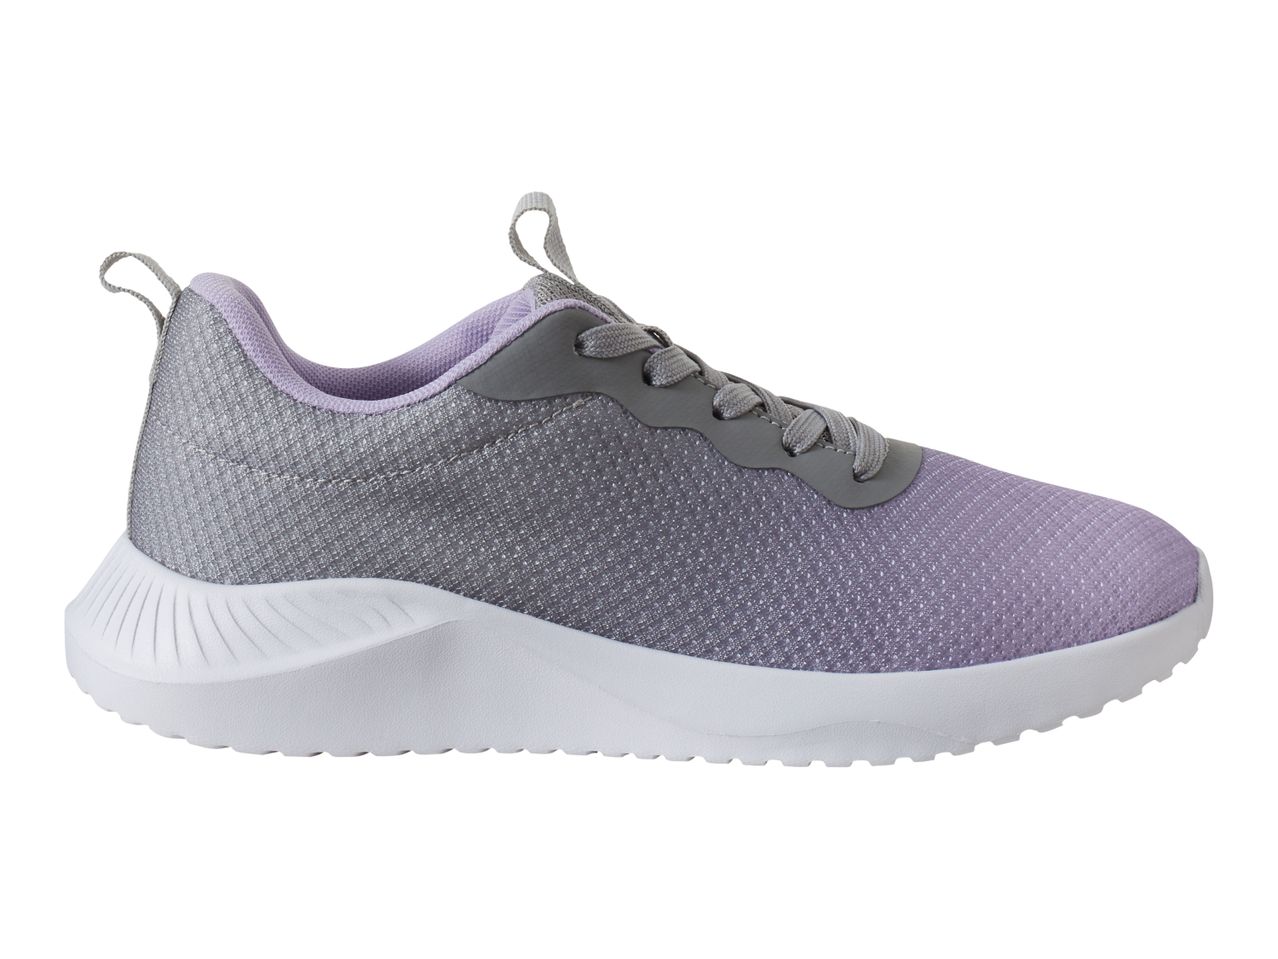 Go to full screen view: Crivit Ladies' Trainers - Image 9